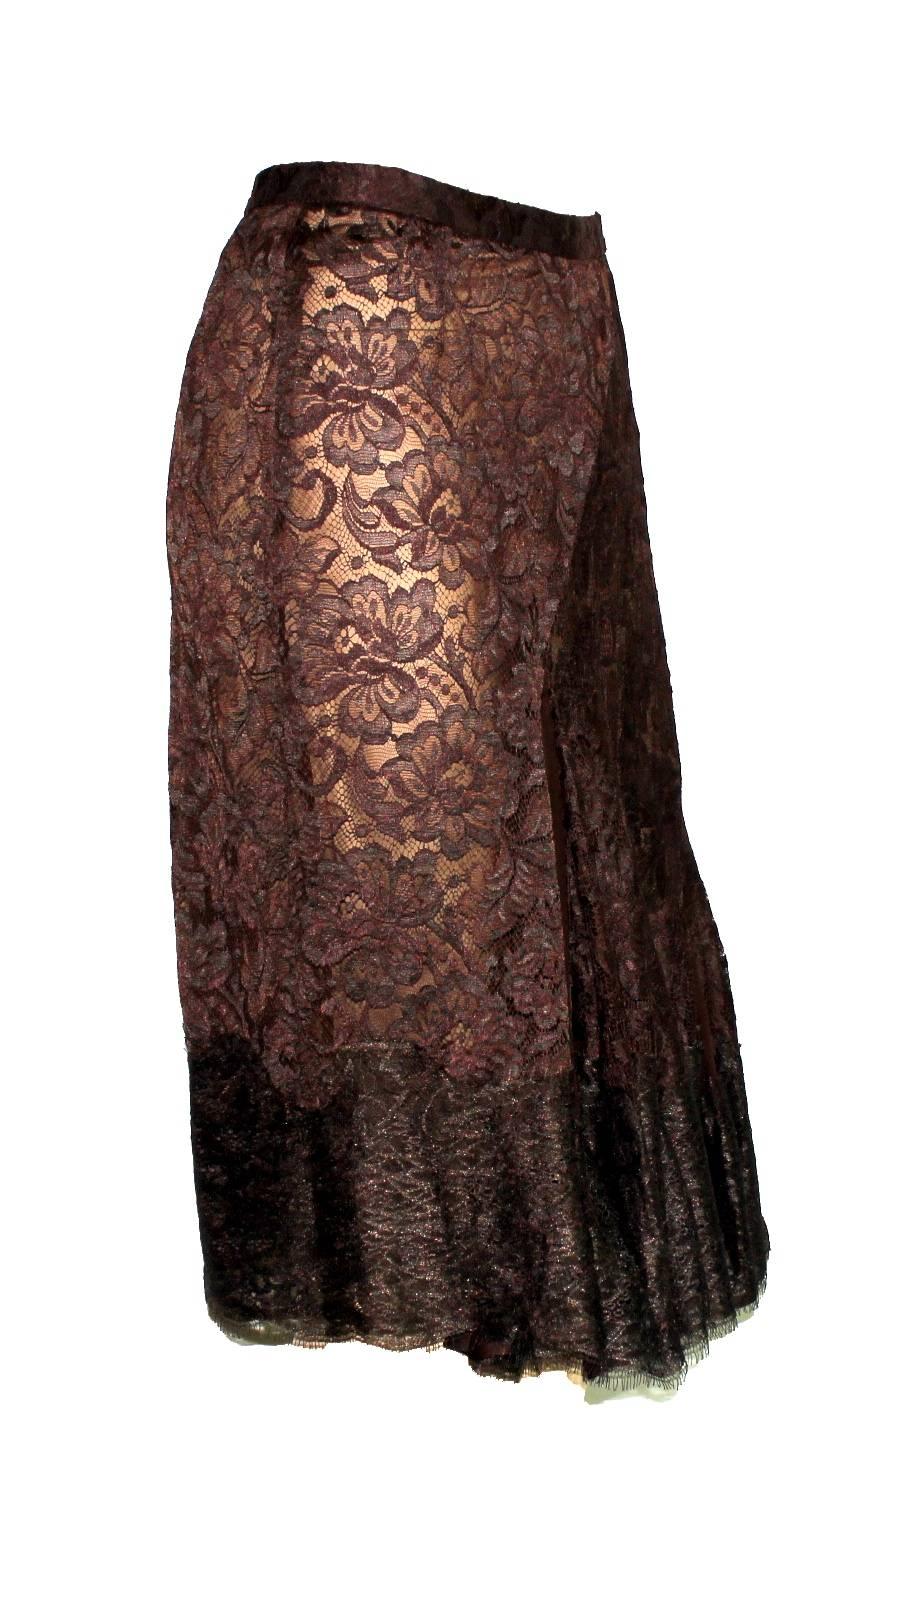 GORGEOUS PLEATED DOLCE & GABBANA LACE SILK SKIRT

DOLCE & GABBANA LACE SKIRTS  ARE A KEY-PIECE OF THE COMING WINTER SEASON 

A MUST HAVE FOR ANY WARDROBE

DETAILS:
Gorgeus DOLCE & GABBANA pleated lace skirt
A timeless classic and must for any